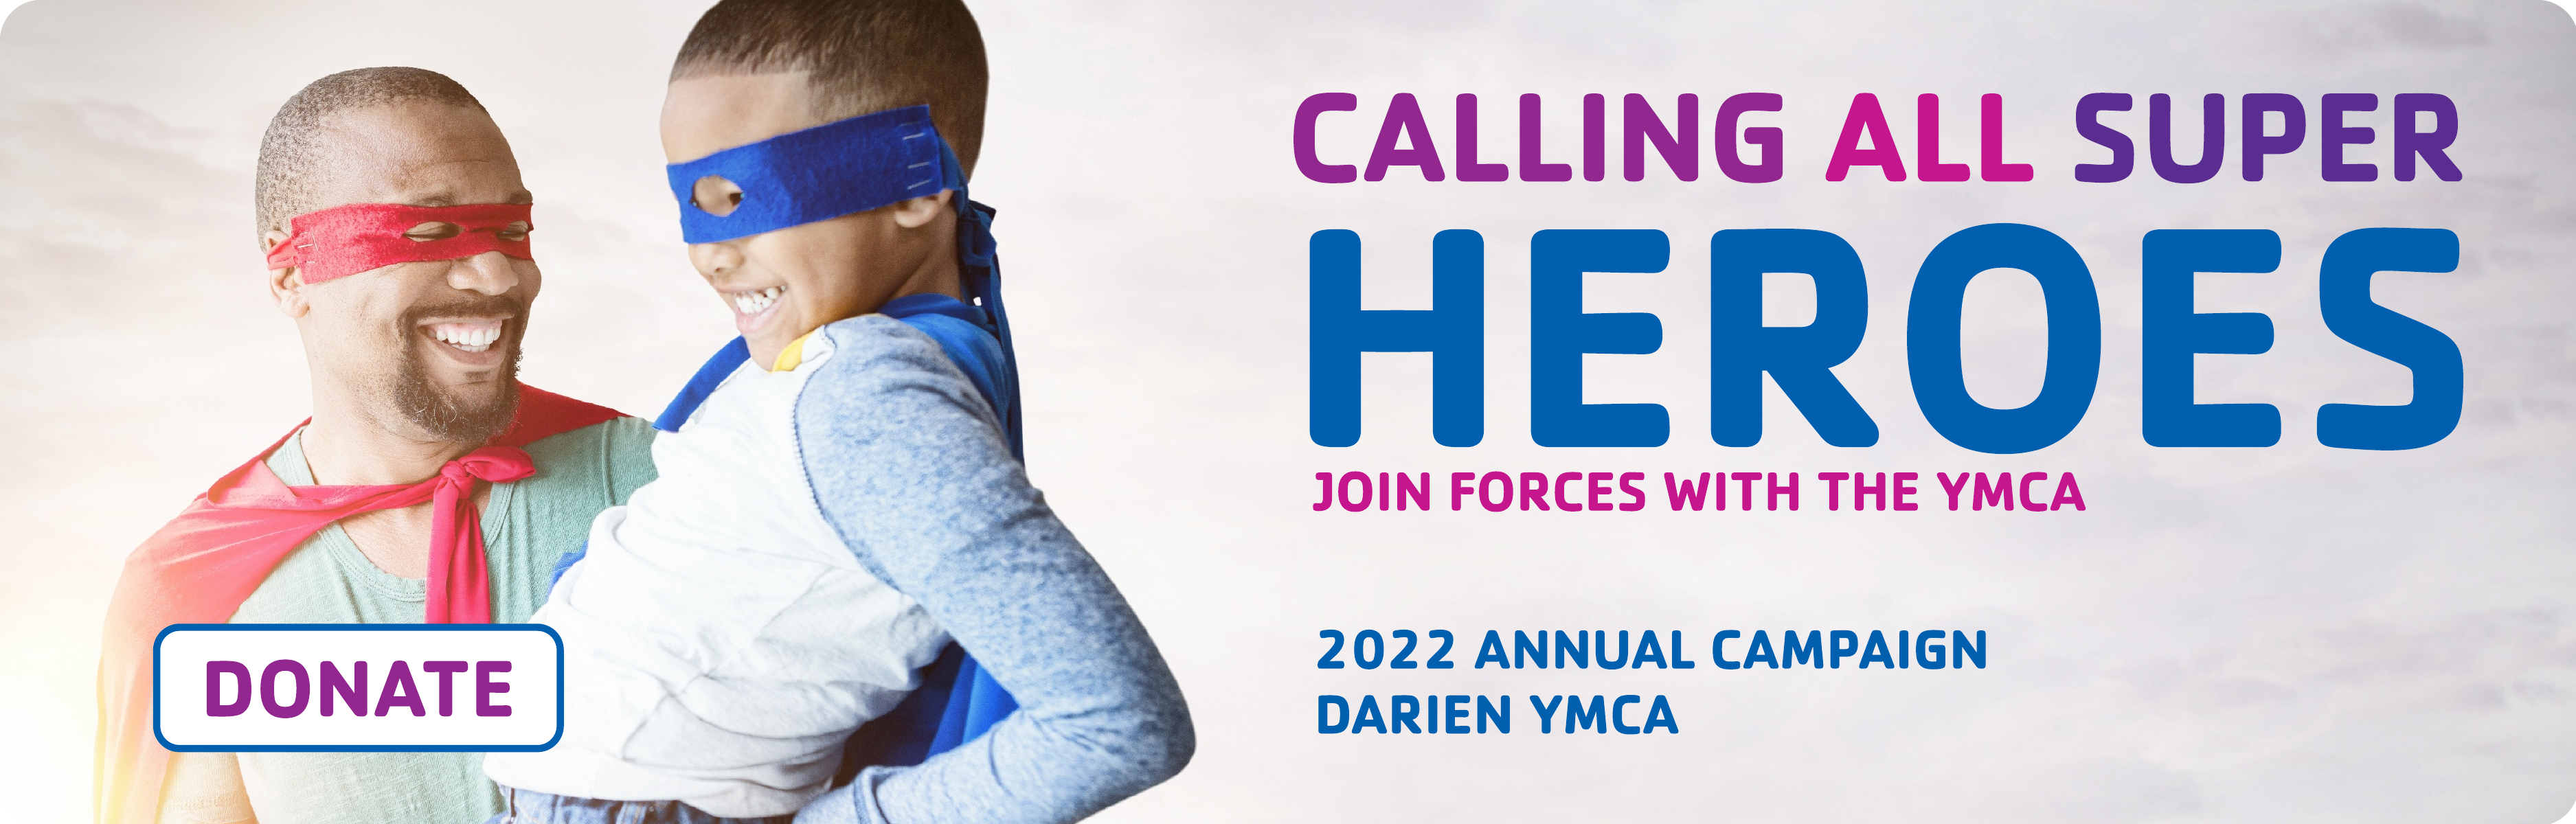 Calling all Superheroes. Join Forces with the YMCA